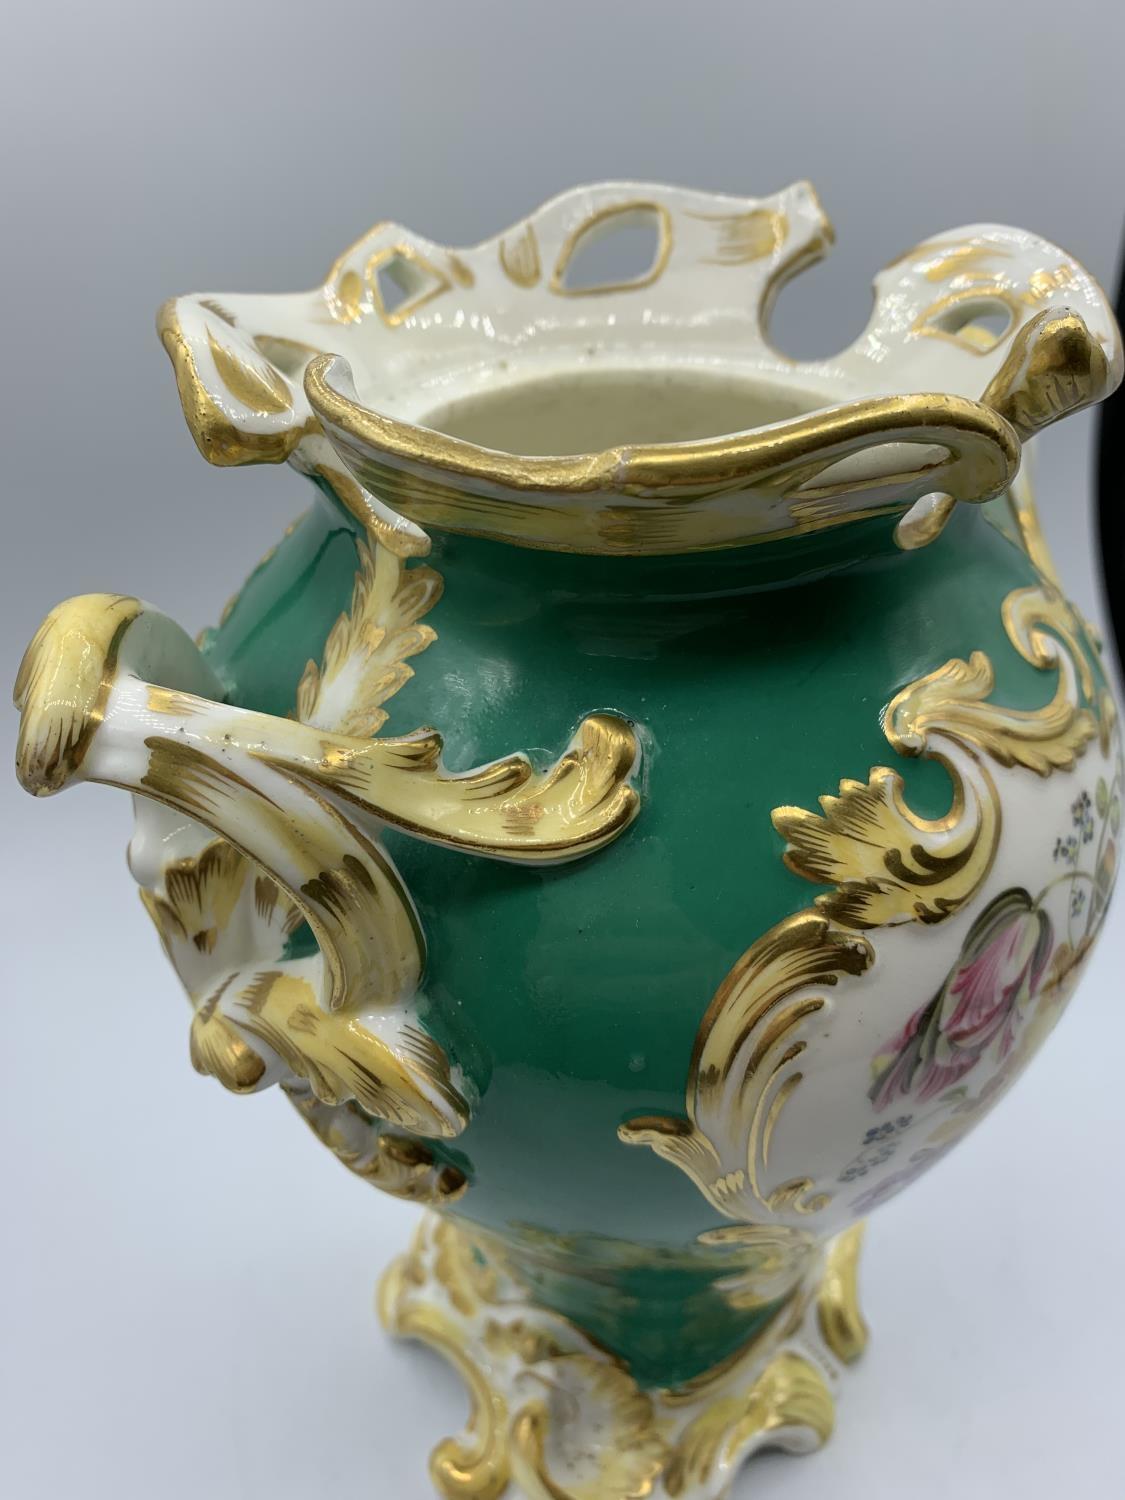 Green Baroque style Vase with Floral print and handles, circa 1880, 23cm tall - Image 7 of 7